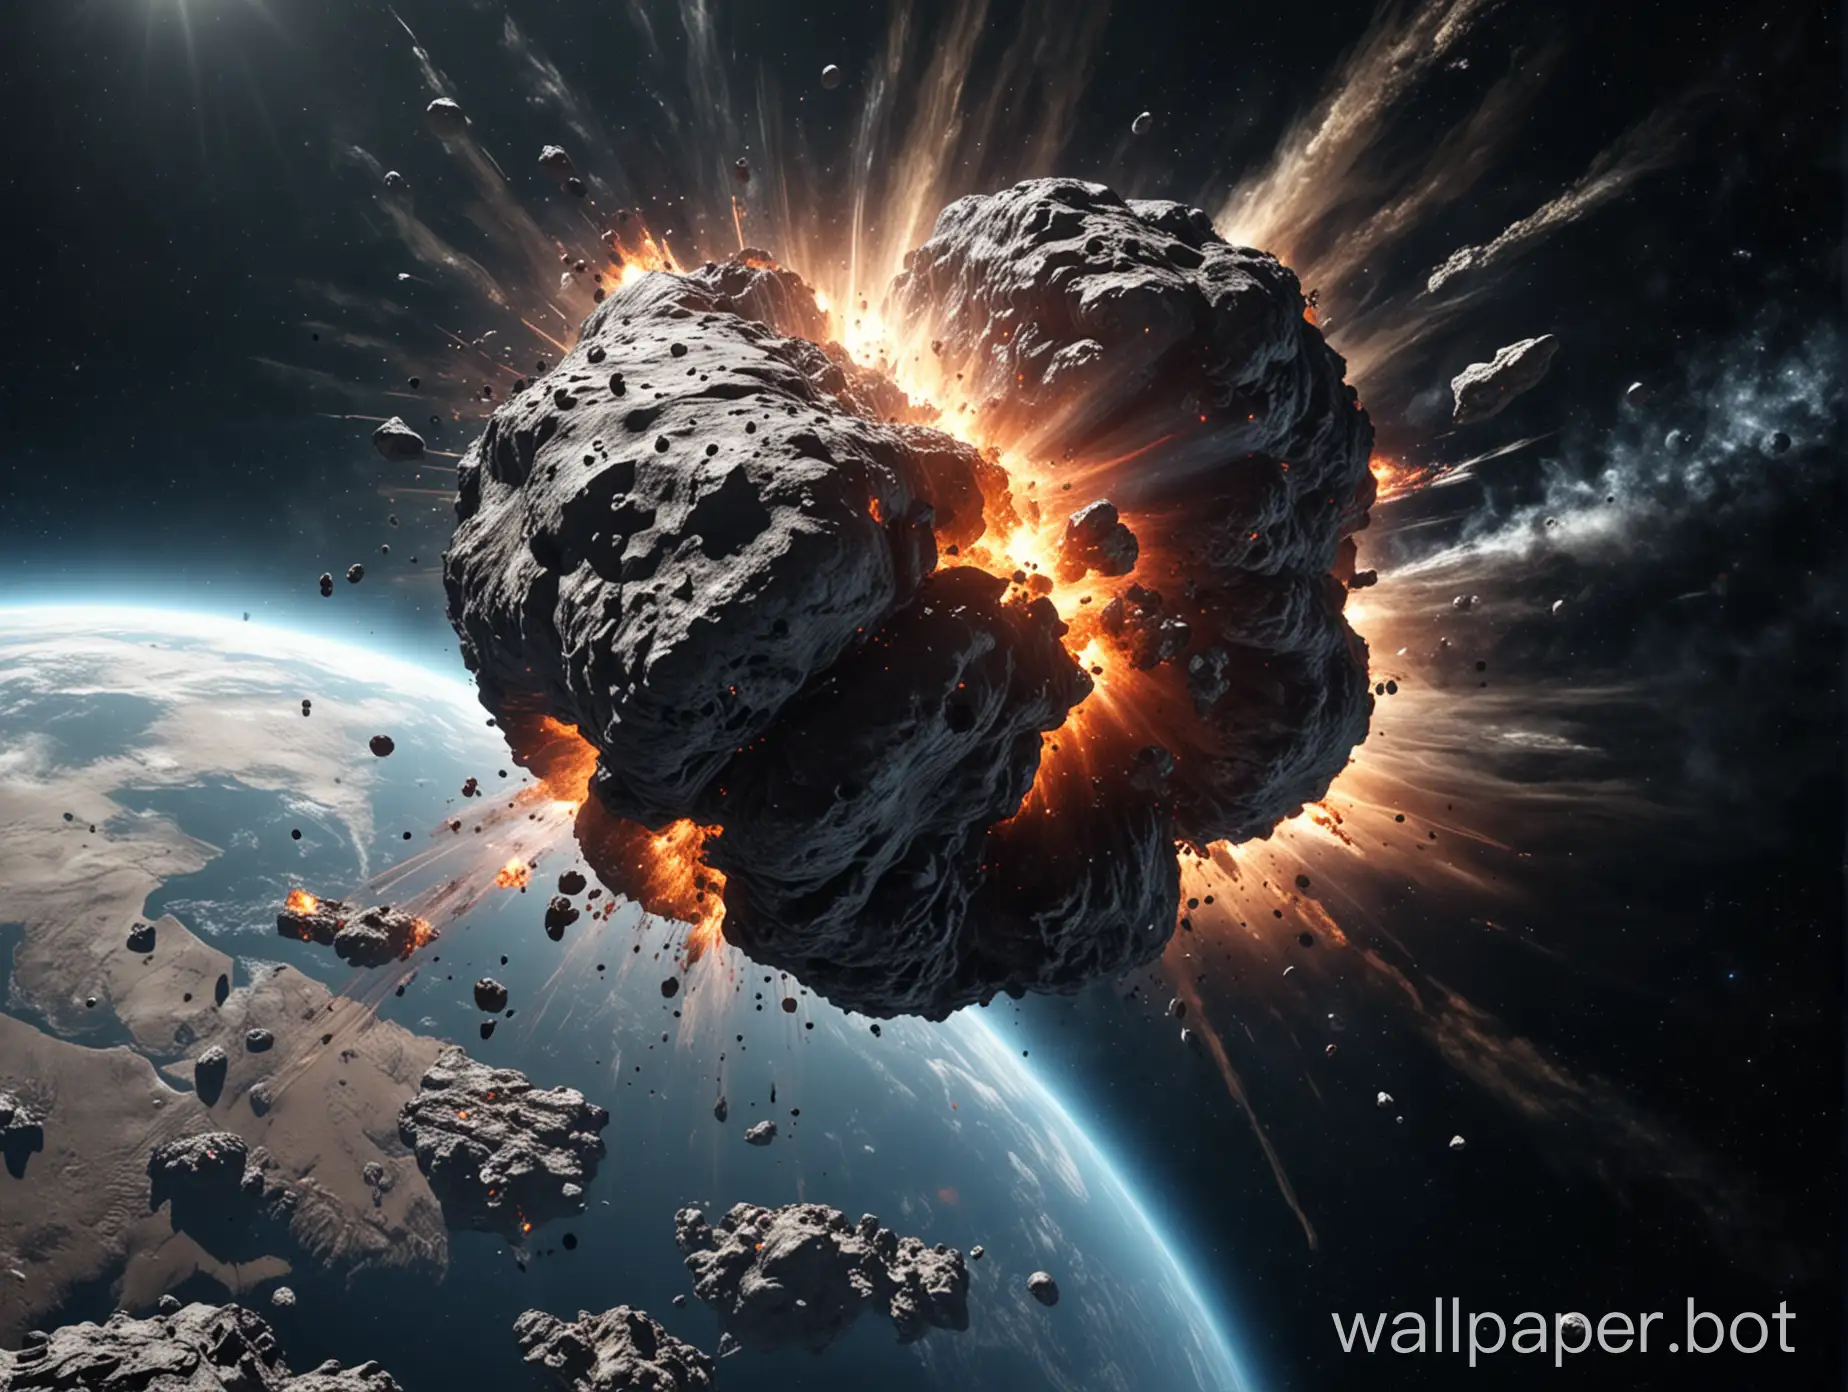 gigantic asteroid crashes into the earth and splits it into pieces, enormous explosion, view from space from a distance